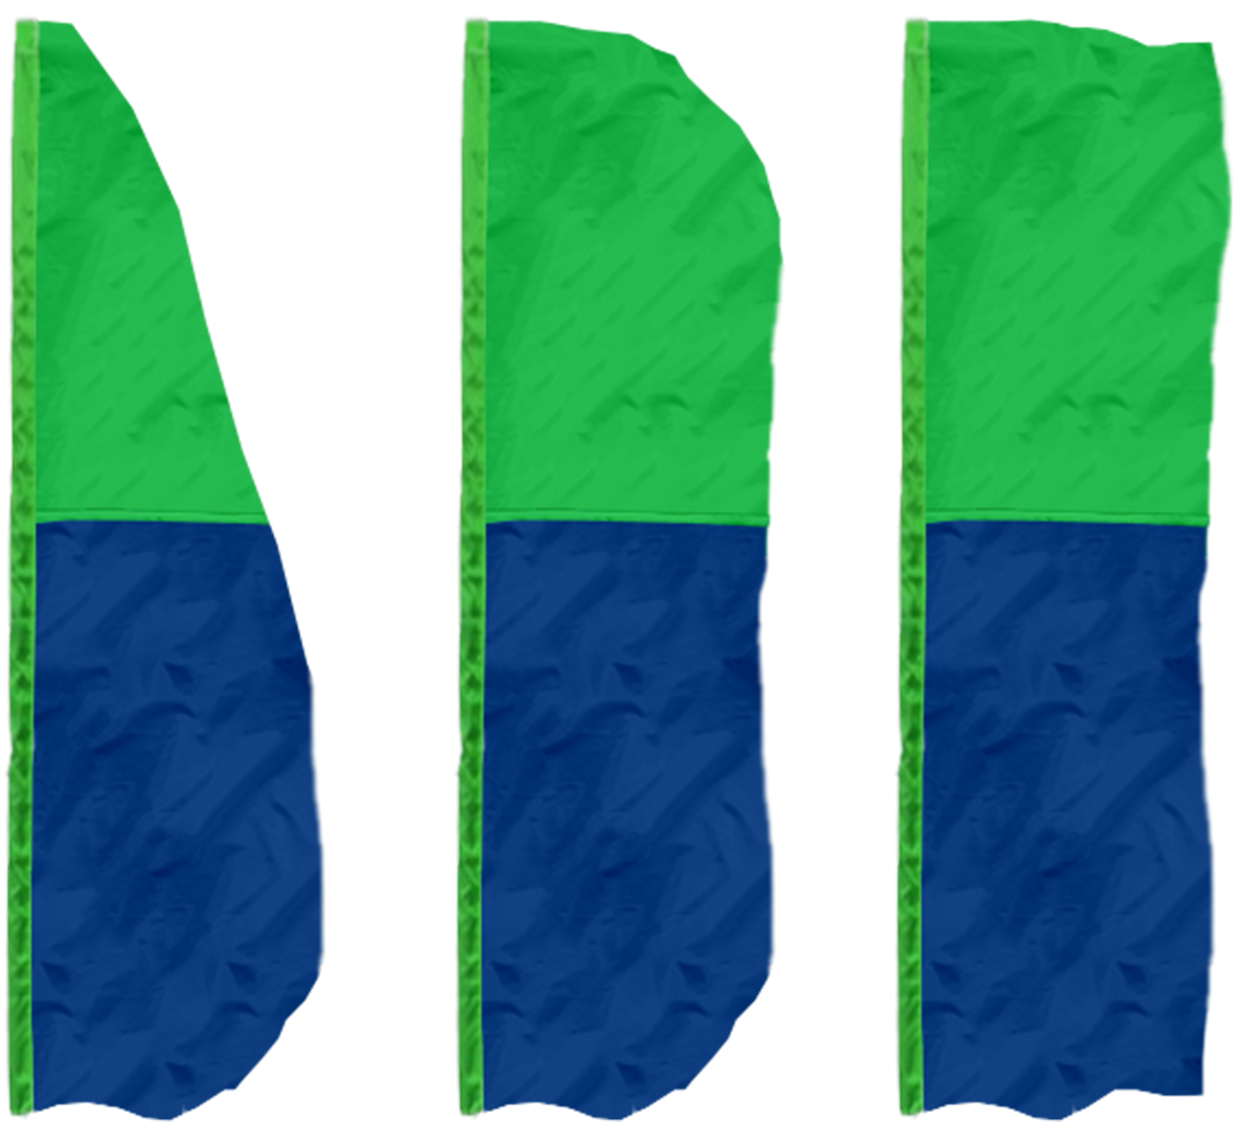 Abstract Greenand Blue Banners PNG image